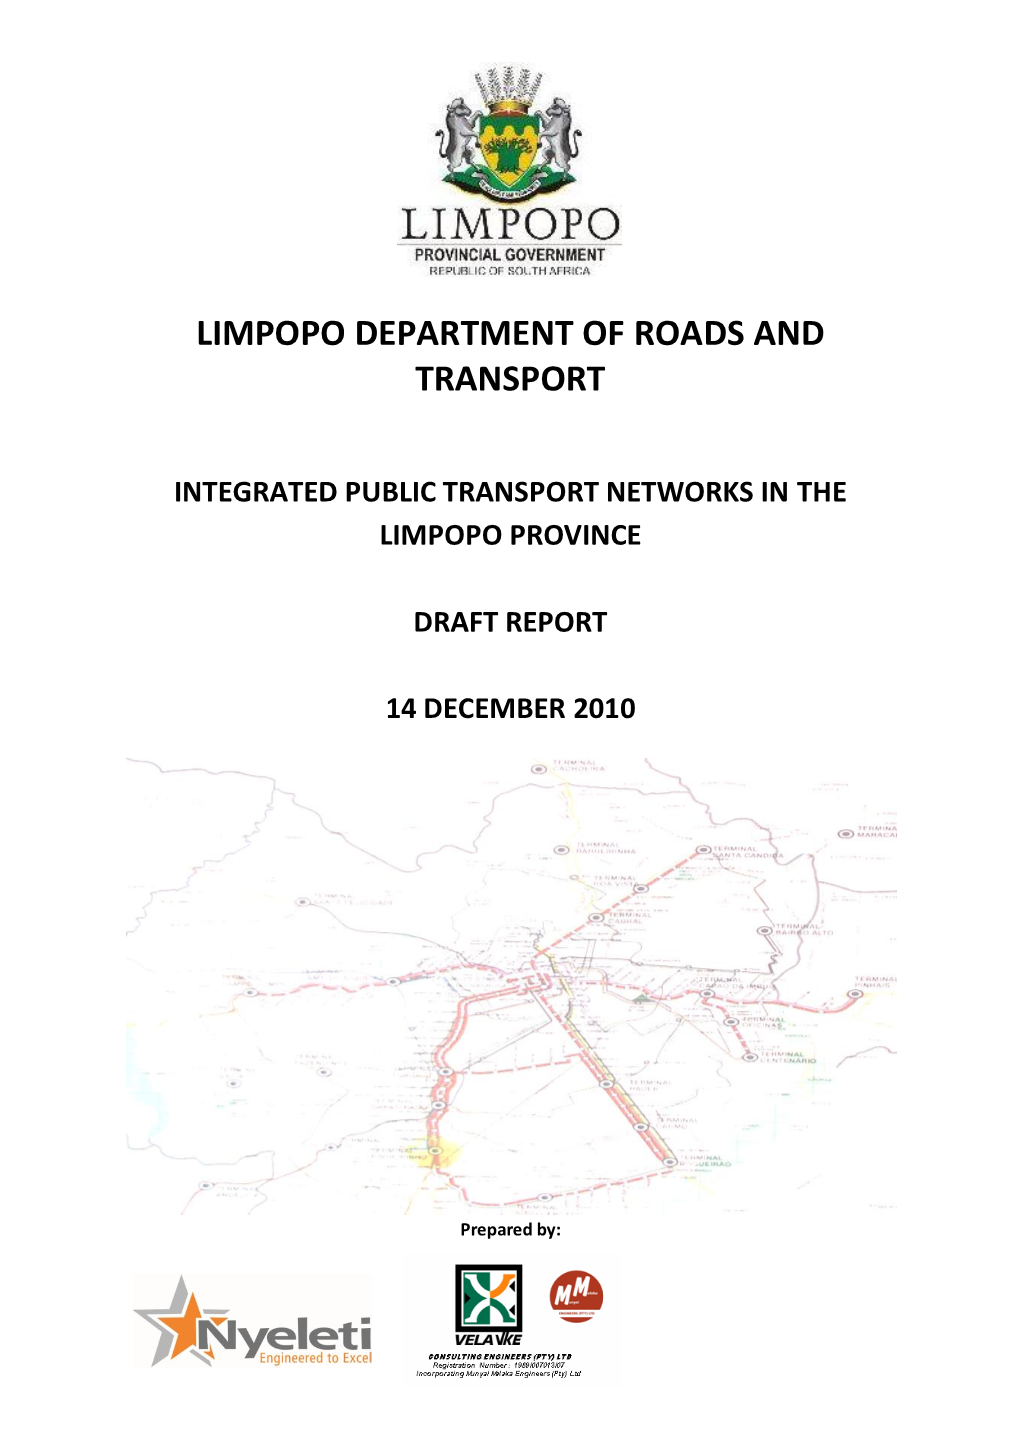 Limpopo Department of Roads and Transport